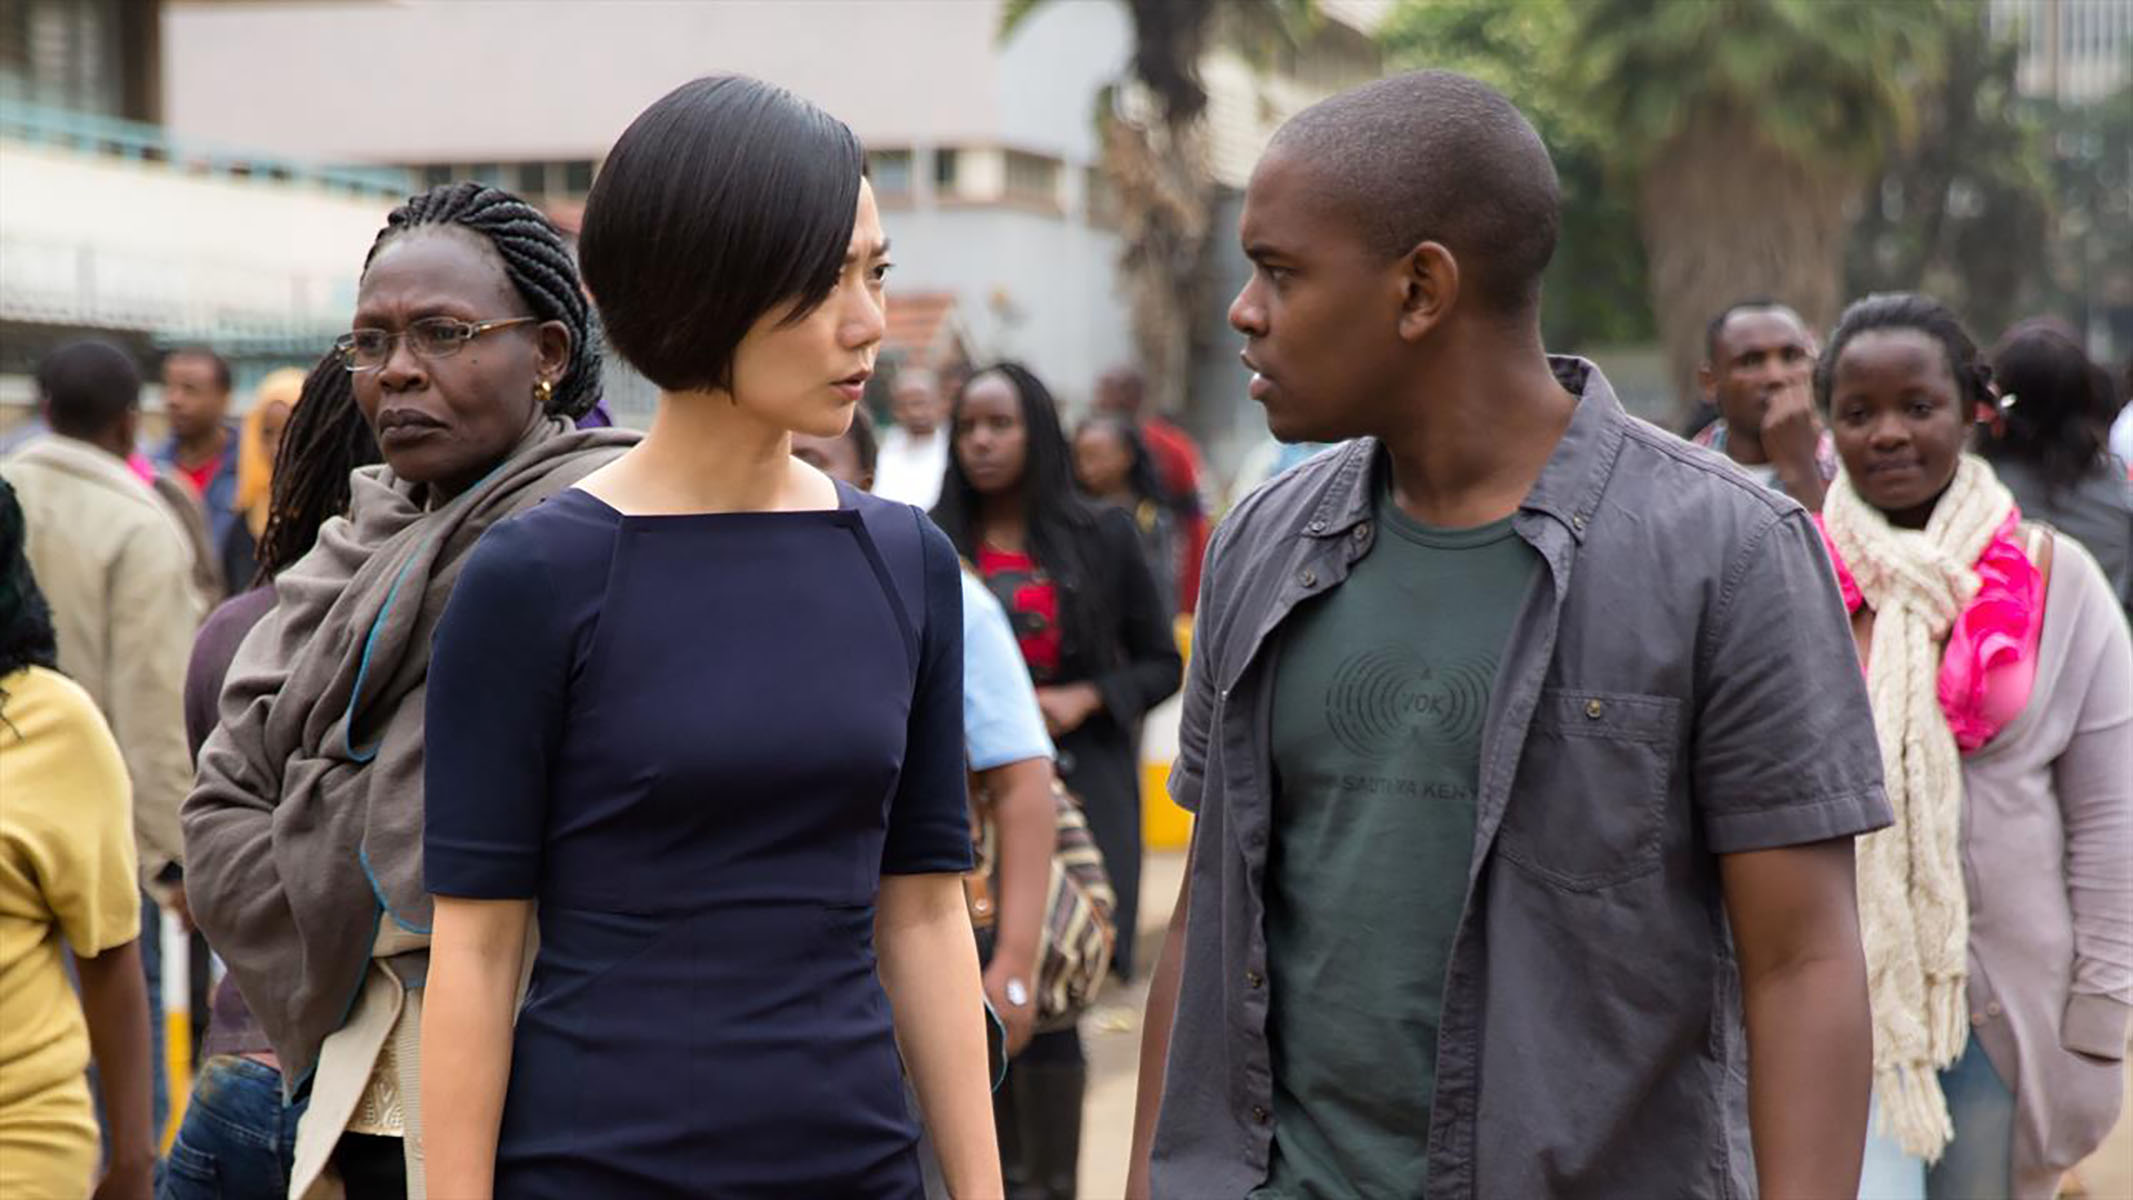 Two characters from "Sense8" have a conversation. Photo courtesy of http://d1oi7t5trwfj5d.cloudfront.net/37/a6/795d28bc4ad9854eabc9c4eb482e/sense8-aml-ameen.jpg.